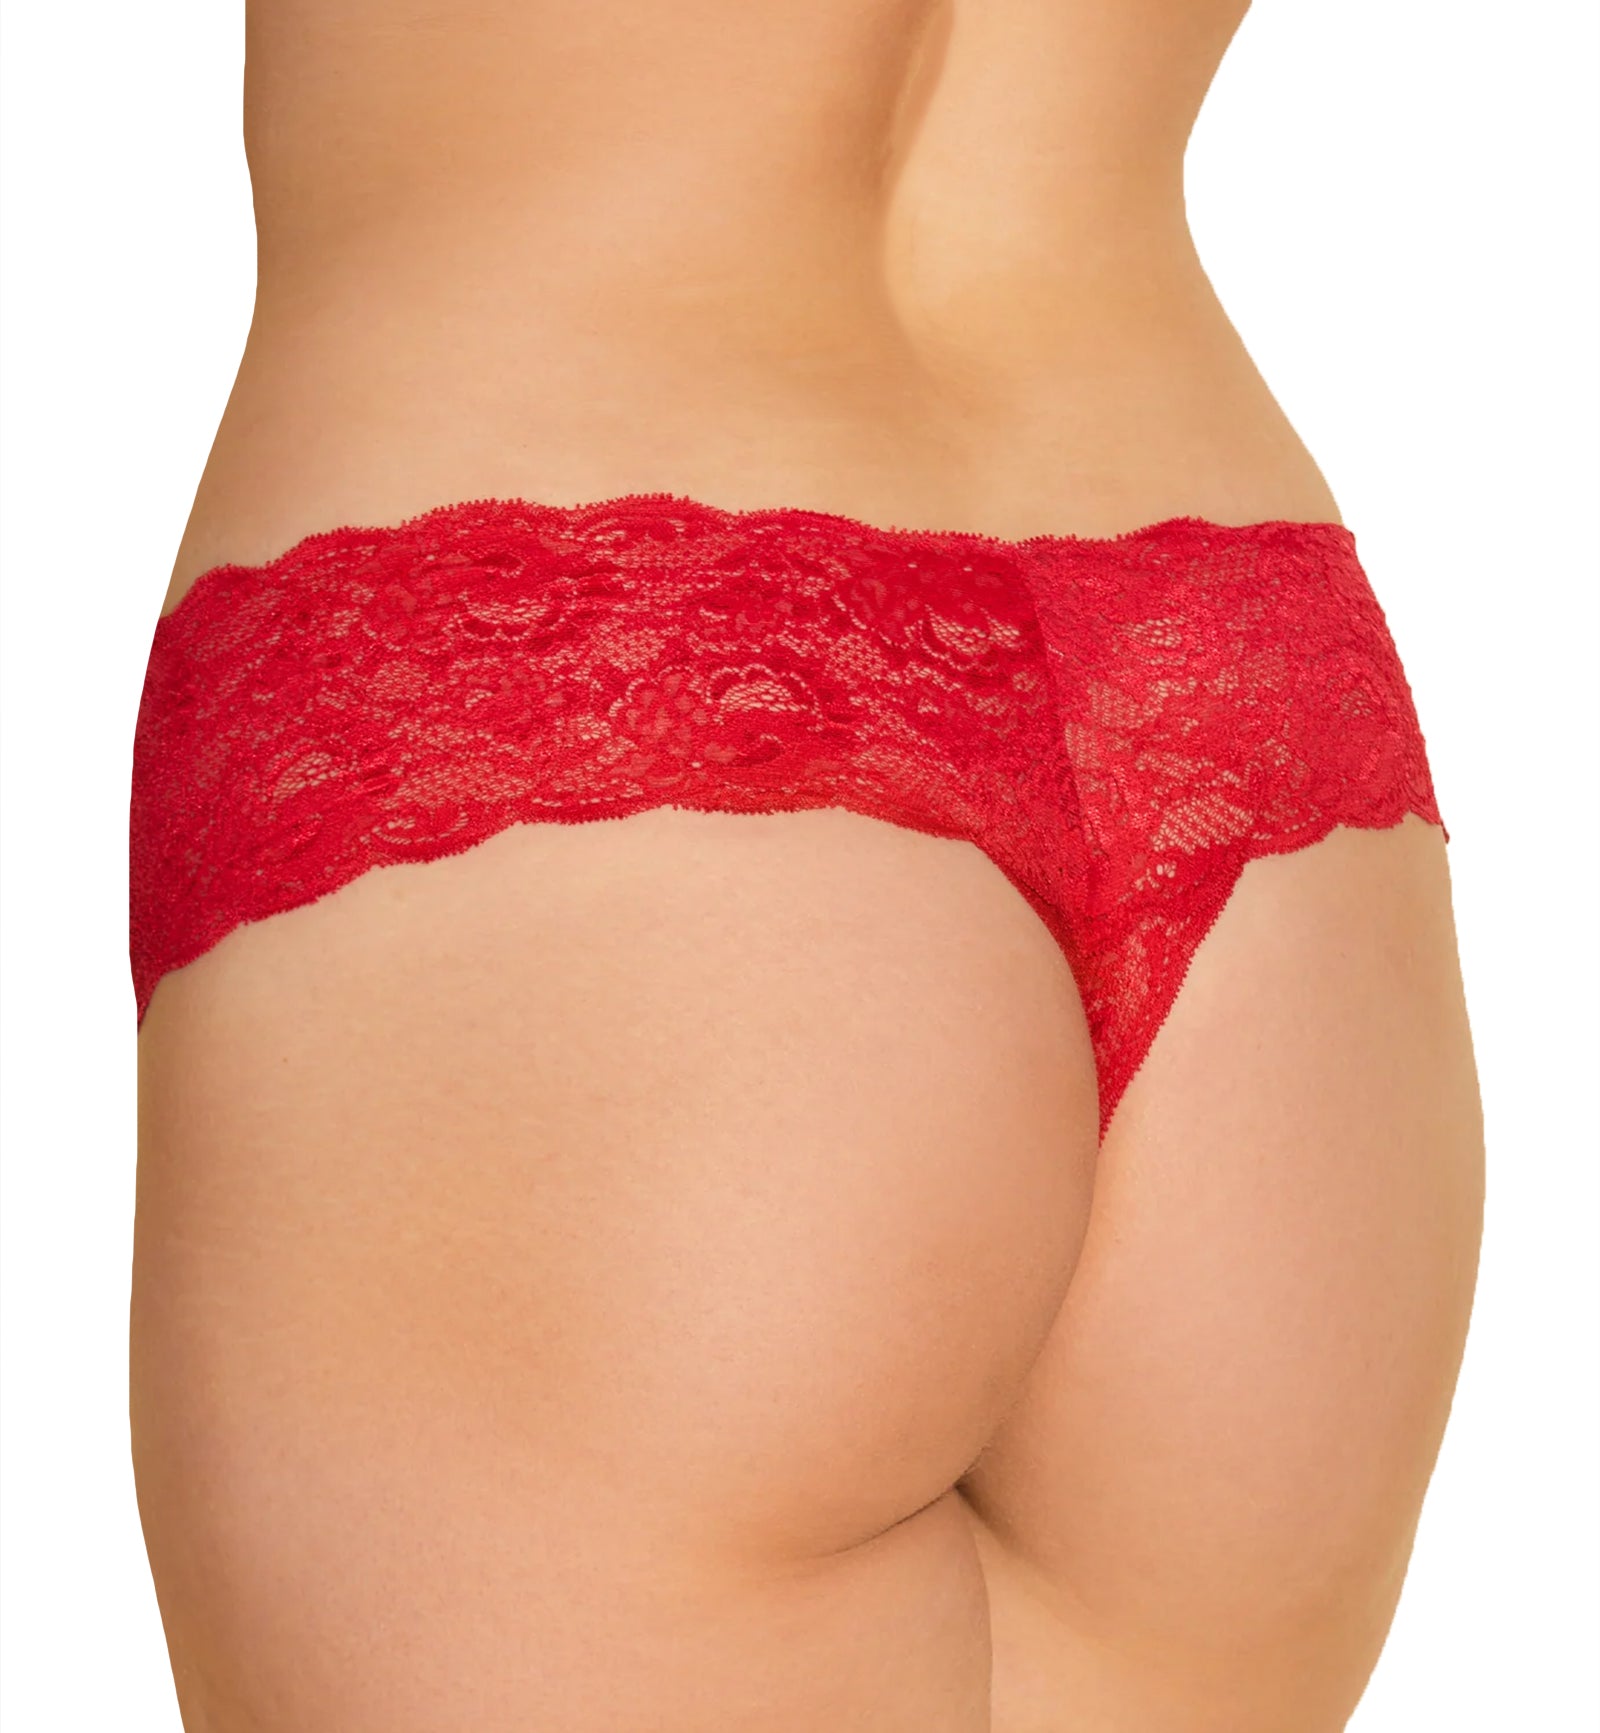 Cosabella Never Say Never Comfie Thong (NEVER0343),S/M,Mystic Red - Mystic Red,S/M